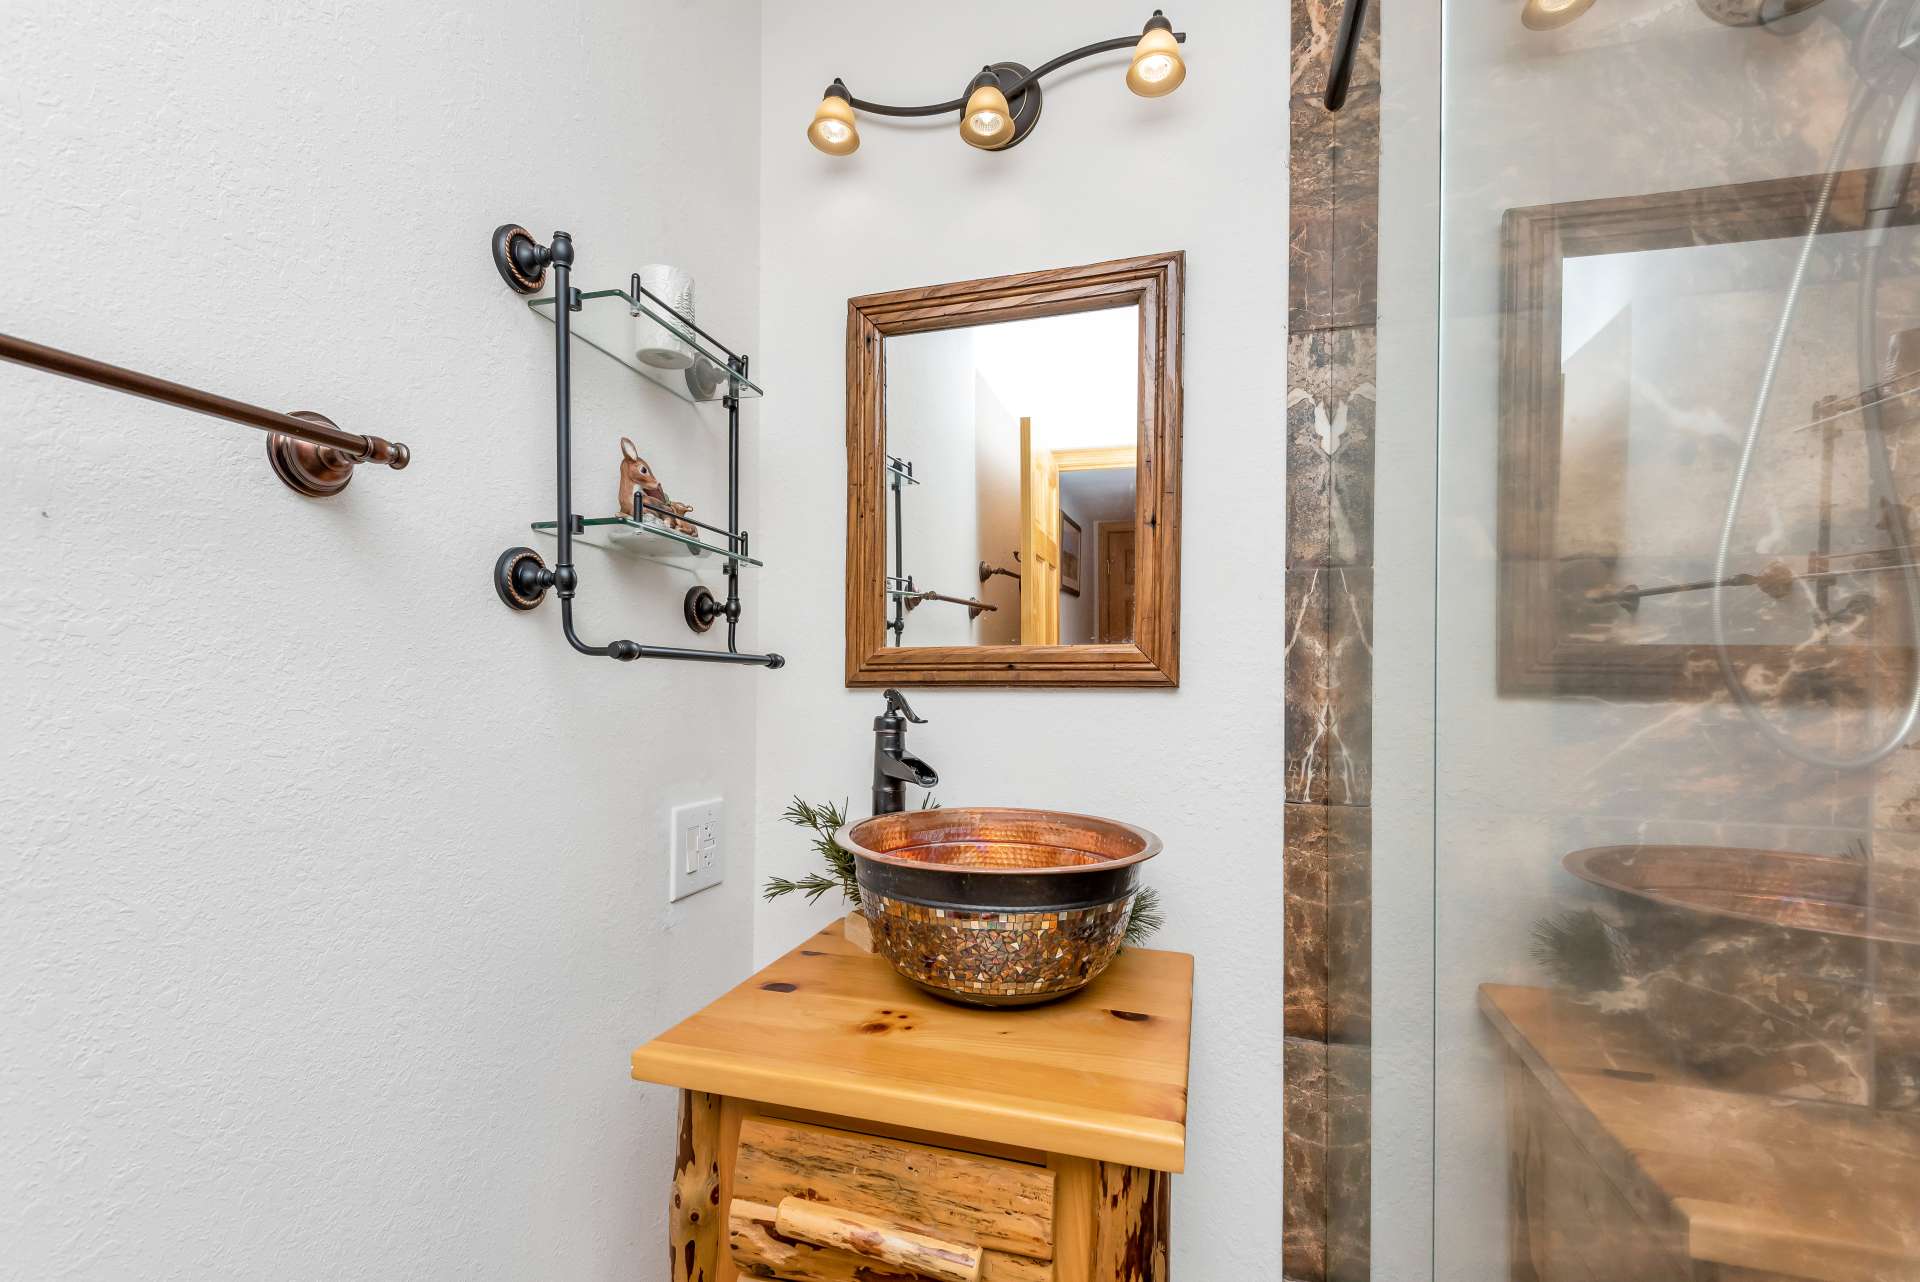 The copper bowl sink tops off the bathroom design.